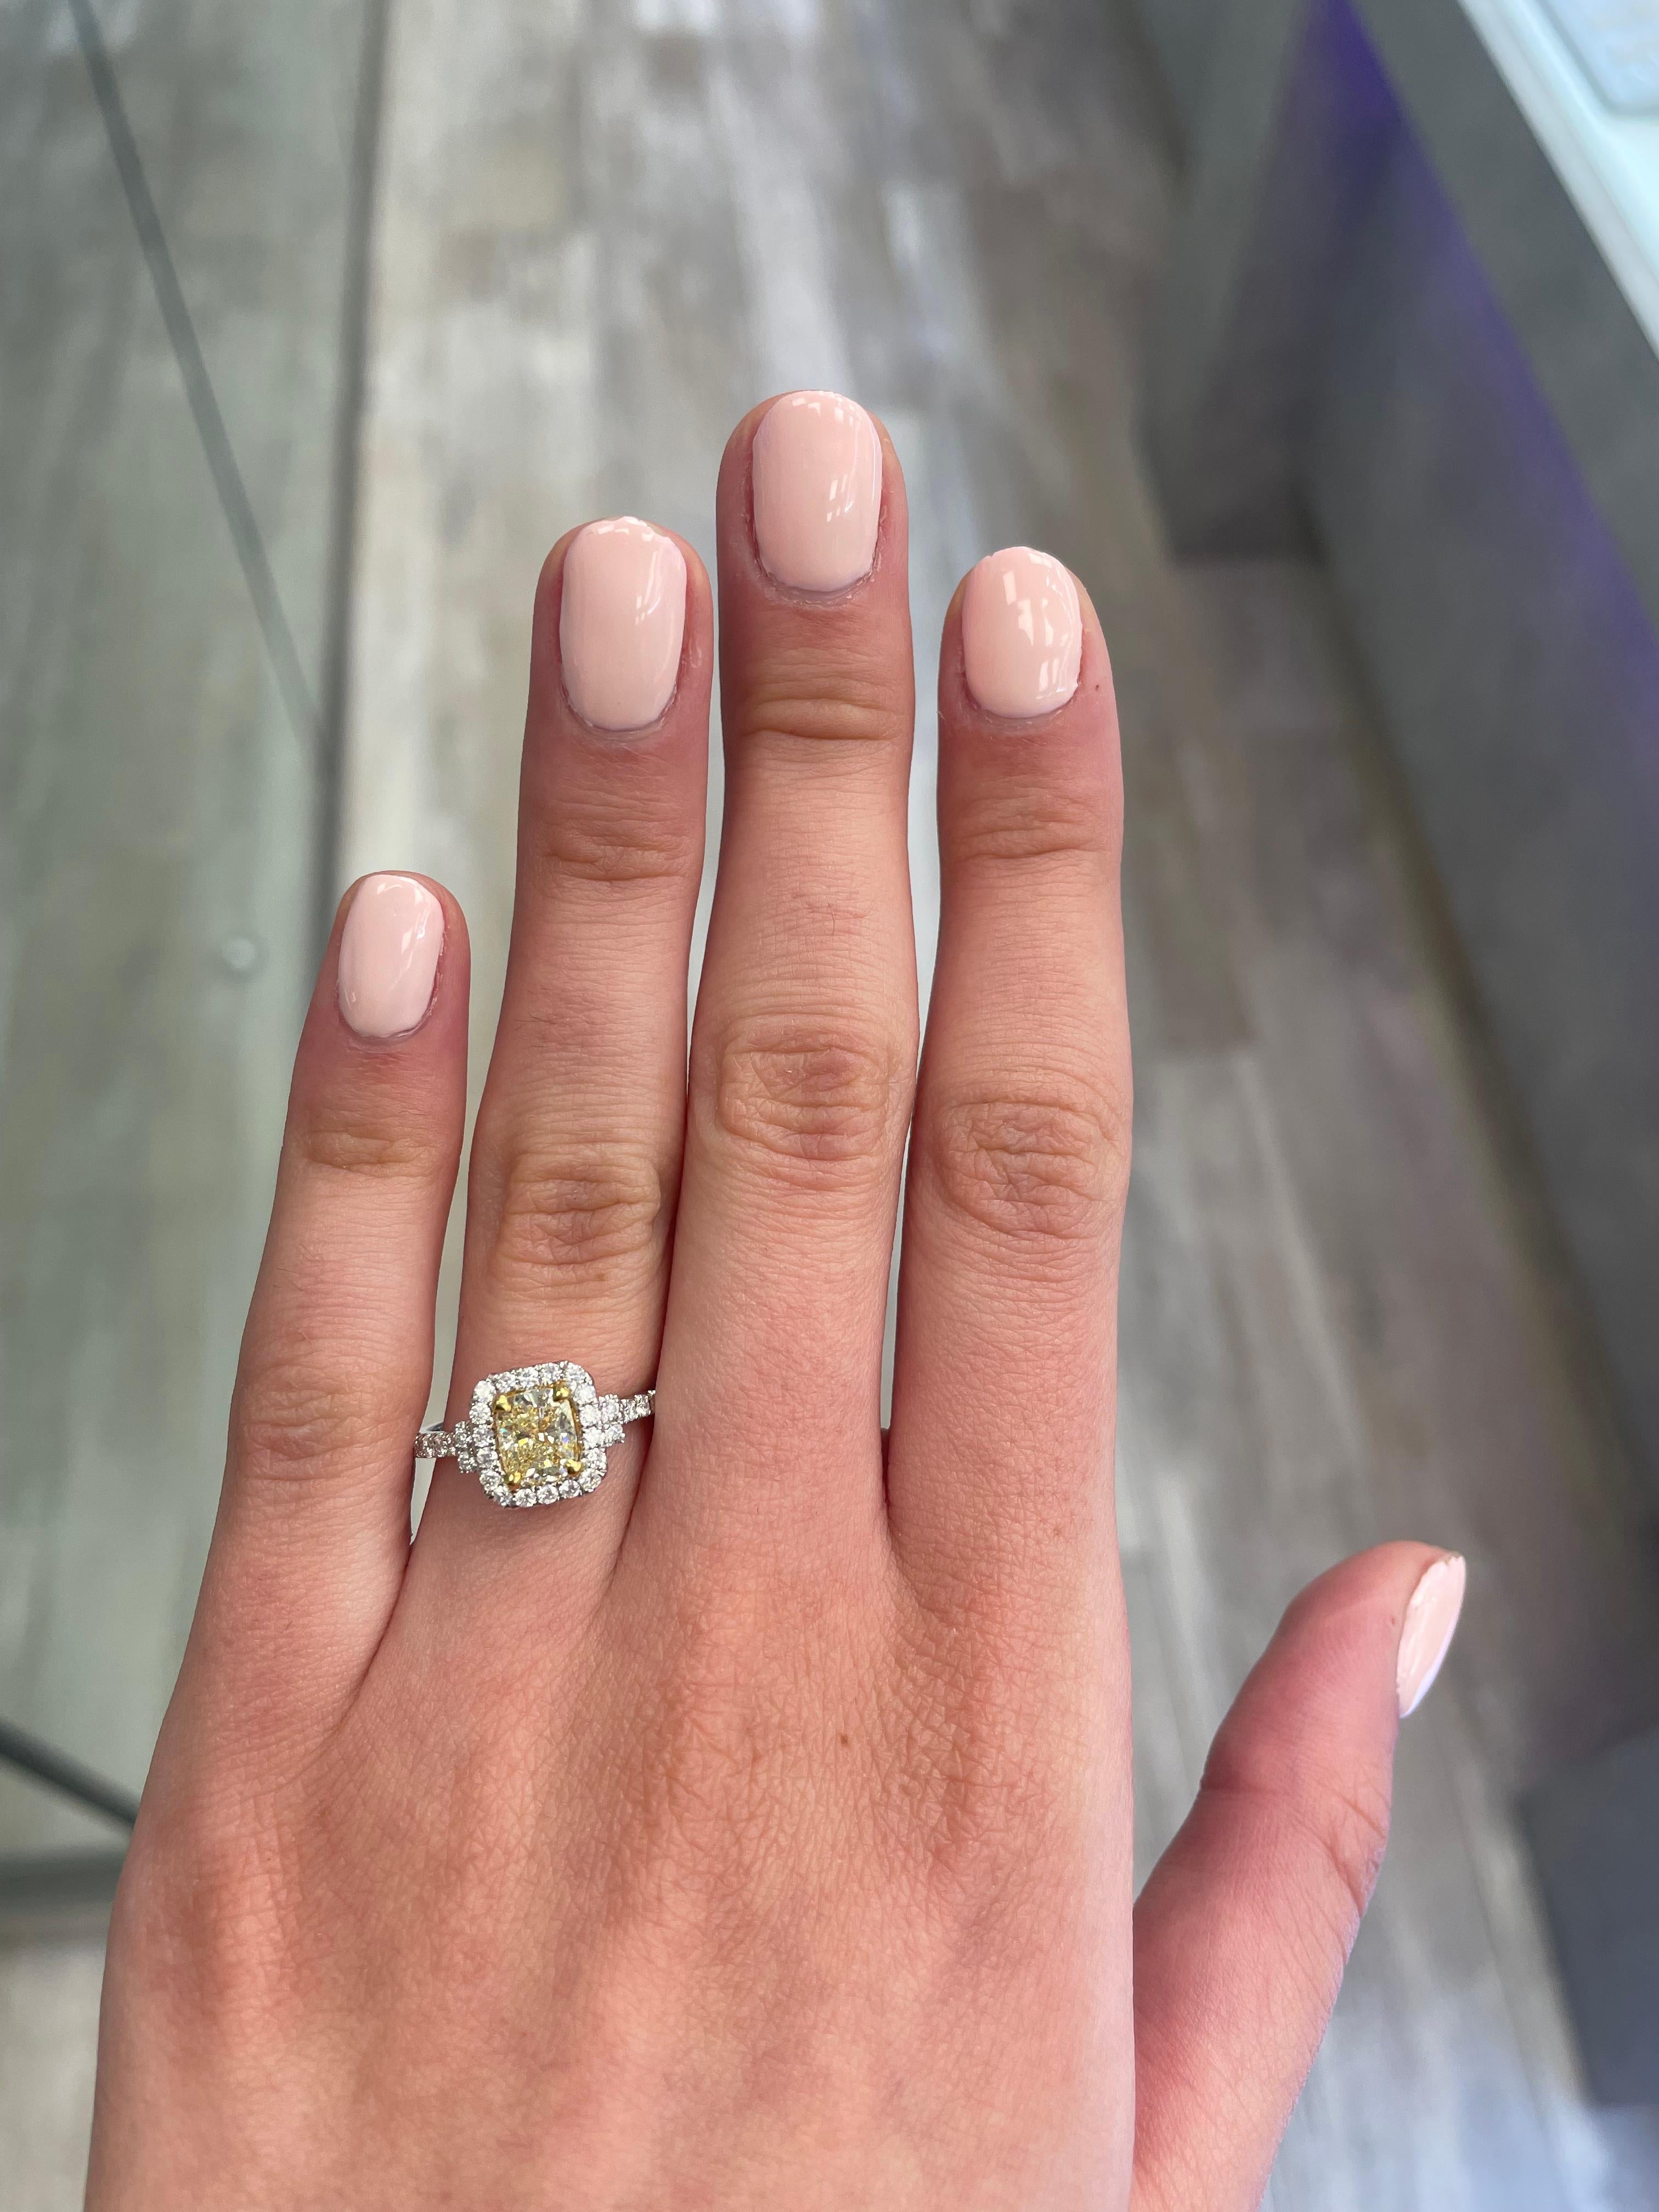 Stunning modern EGL certified yellow diamond with halo ring, two-tone 18k yellow and white gold. By Alexander Beverly Hills
1.47 carats total diamond weight.
1.07 carat cushion cut Fancy Yellow color and SI1 clarity diamond, EGL graded. Complimented